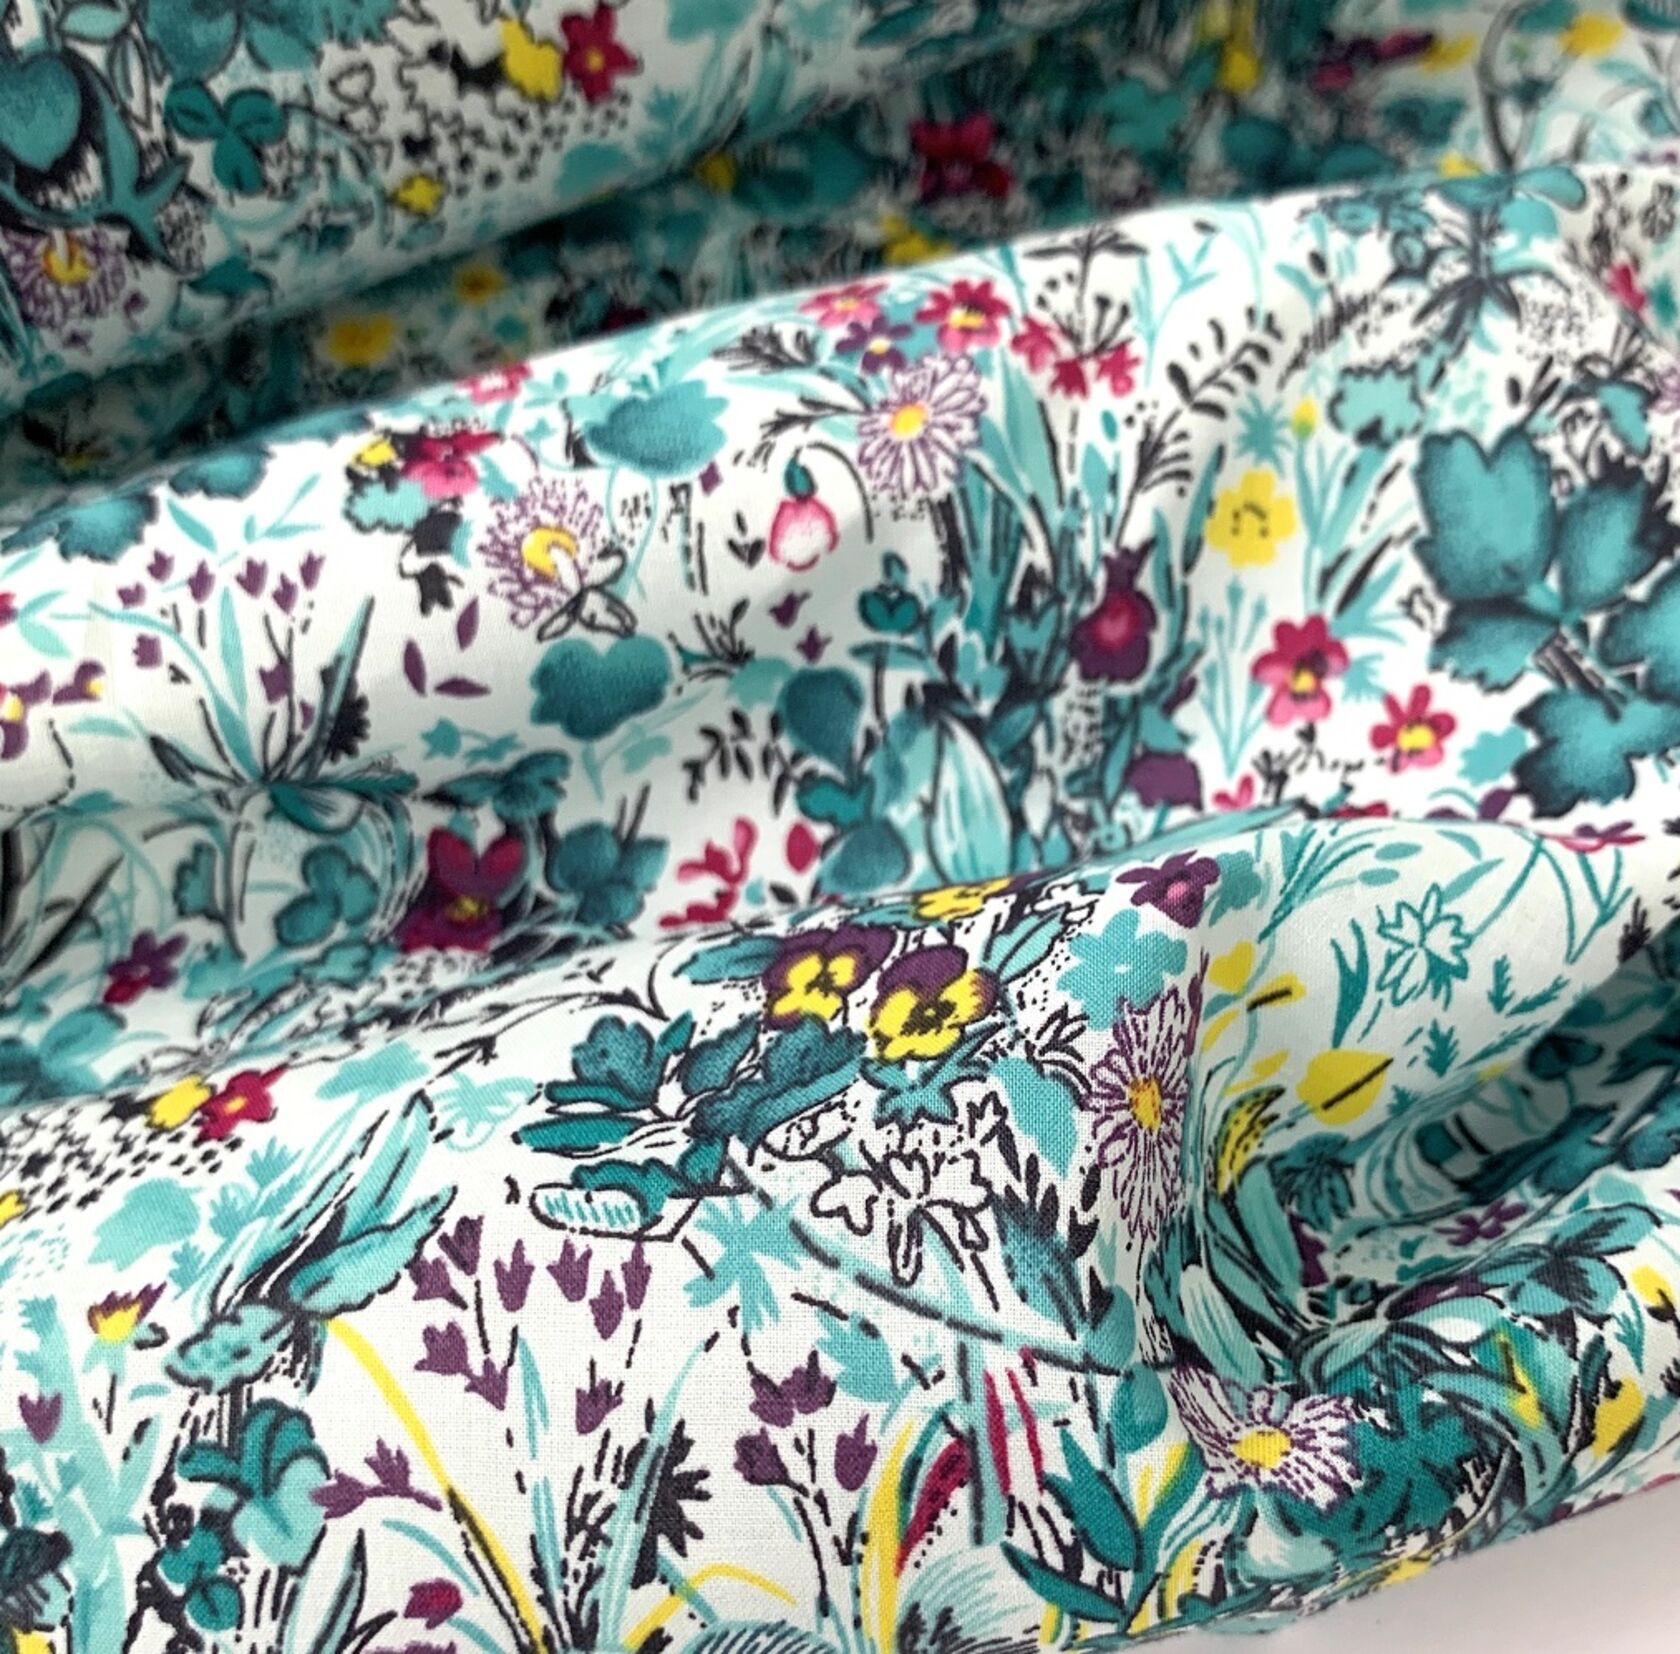 Cotton Lawn Fabric by the Yard